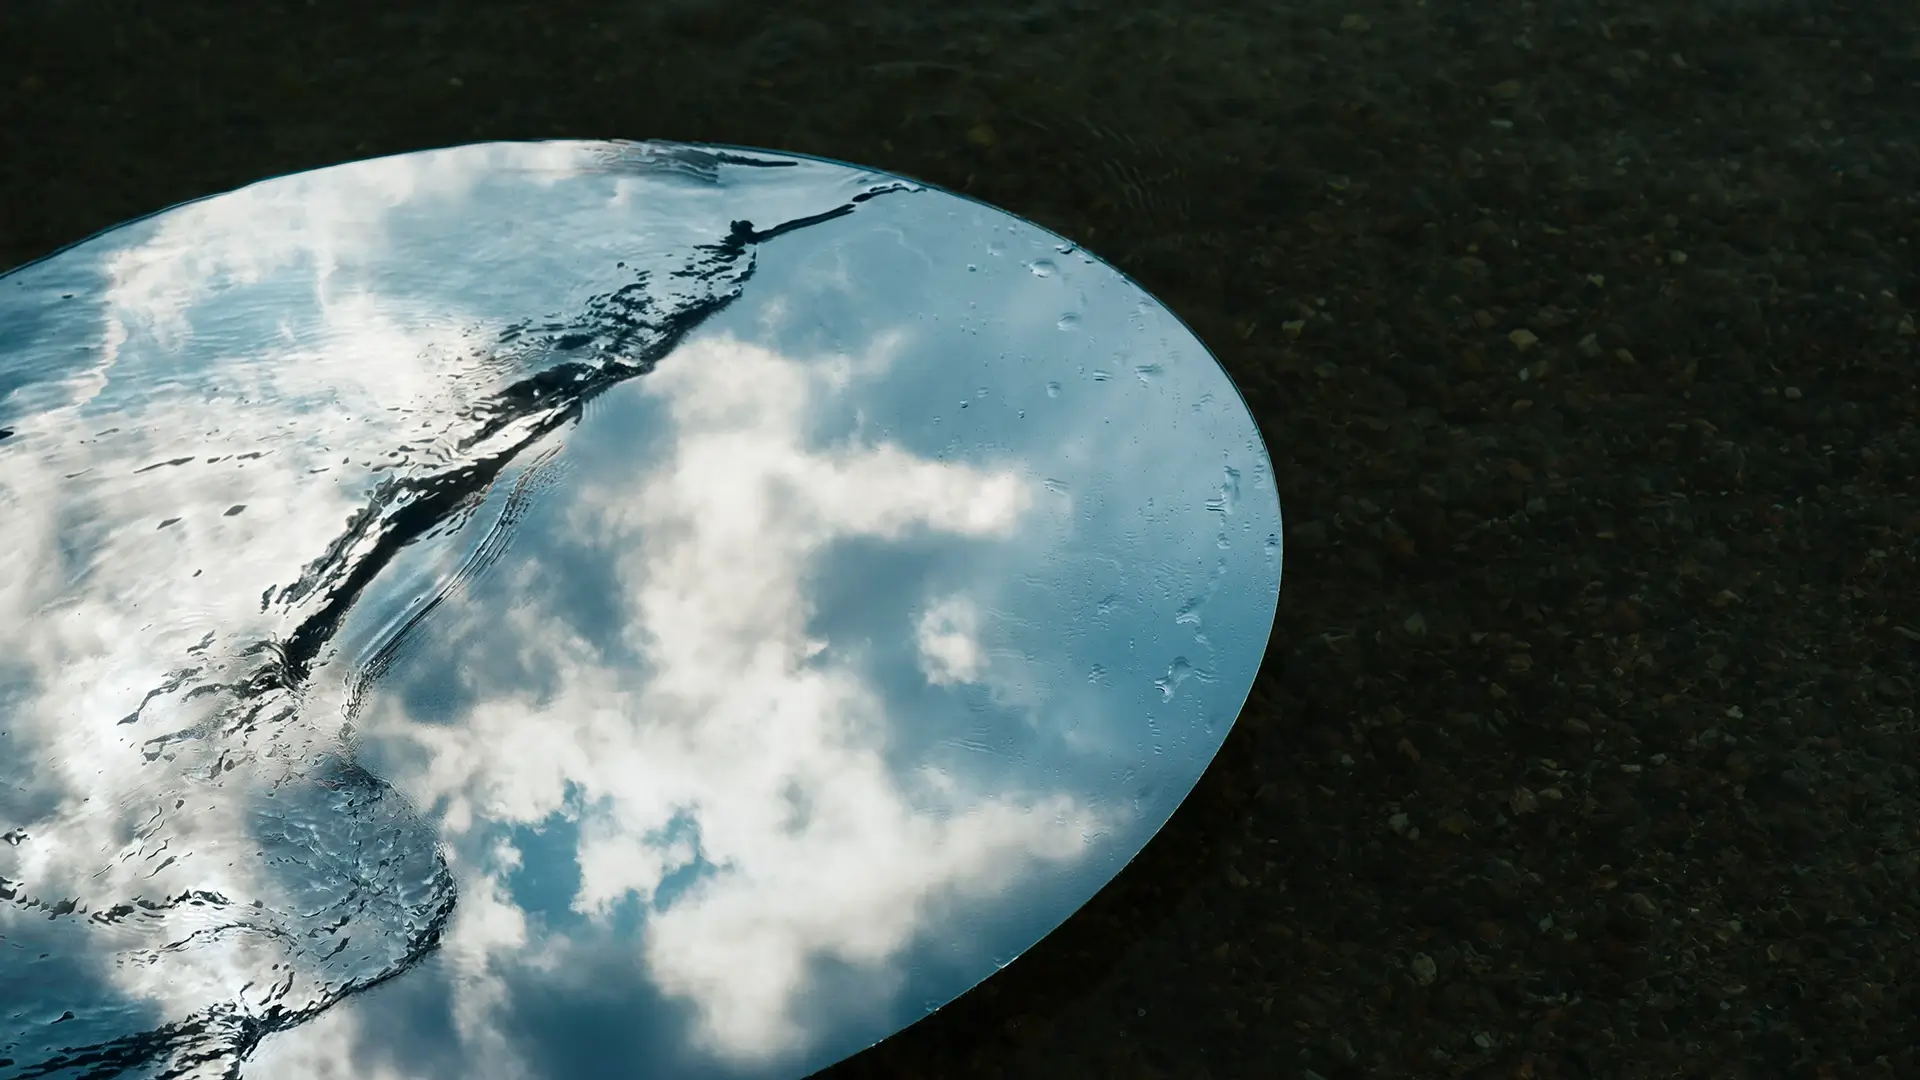 Reflection clouds sky mirror water surface